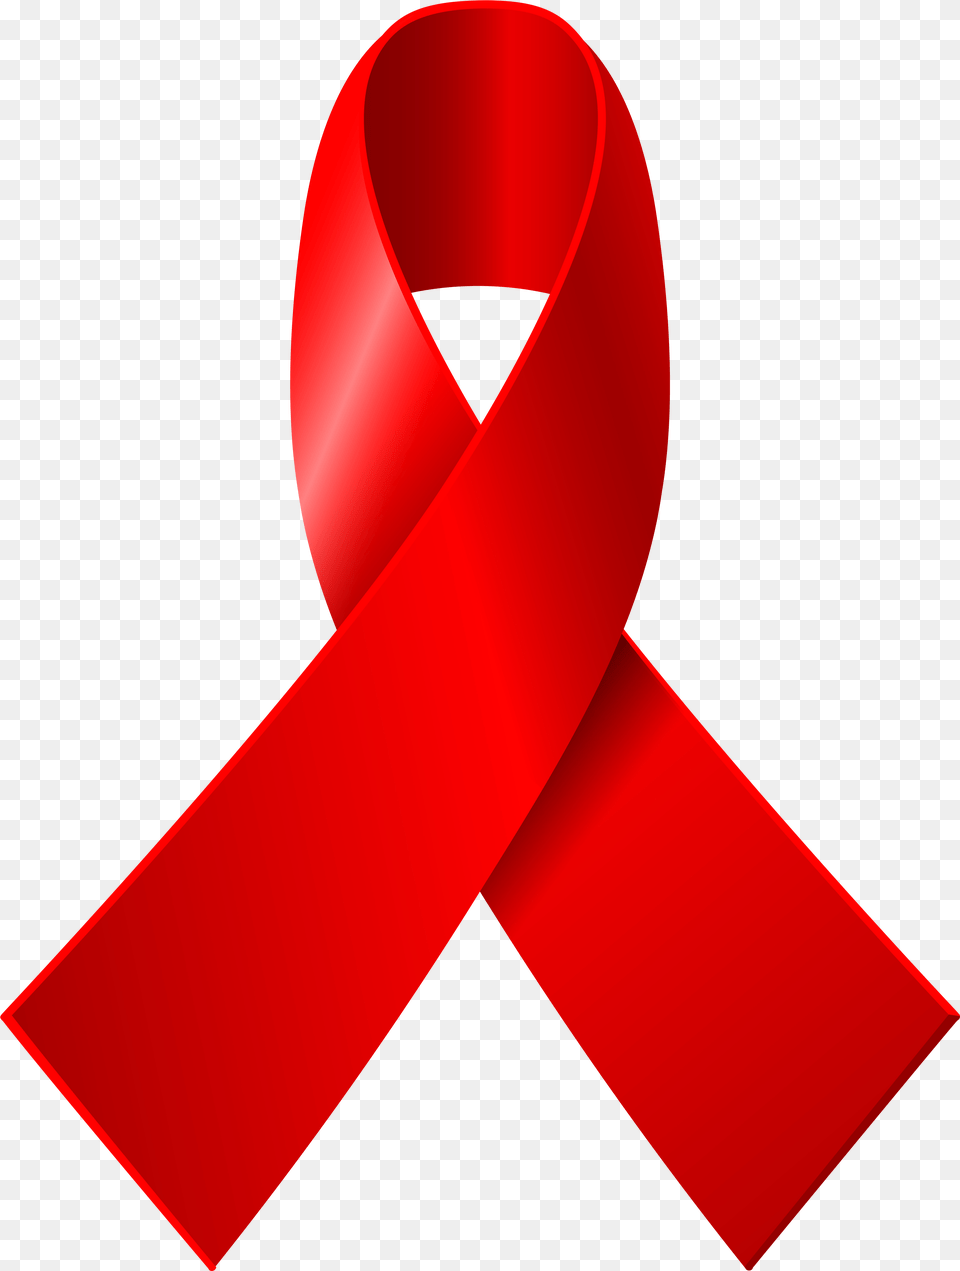 Download Free Red Awareness Ribbon Transparent Background Aids Ribbon, Accessories, Formal Wear, Tie, Belt Png